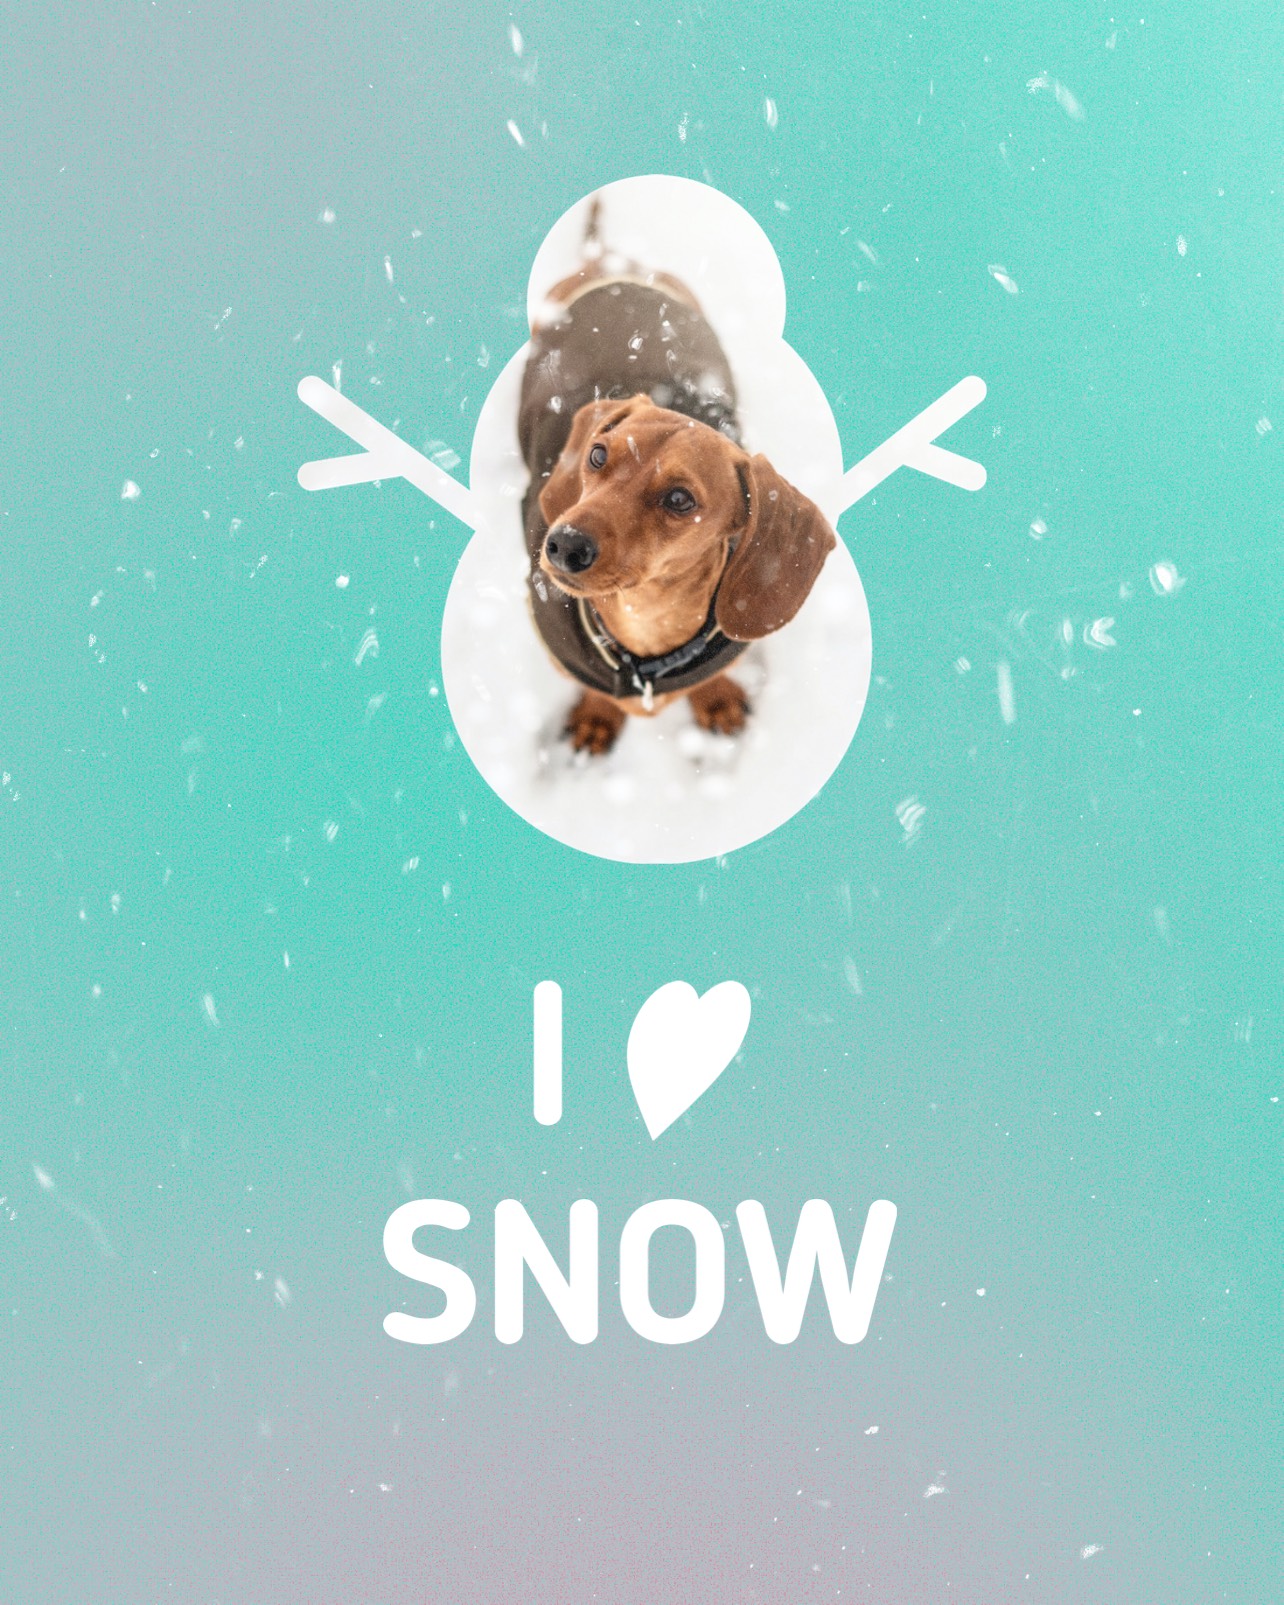 A Dog Is Looking Up At The Camera Winter Wonderland Template